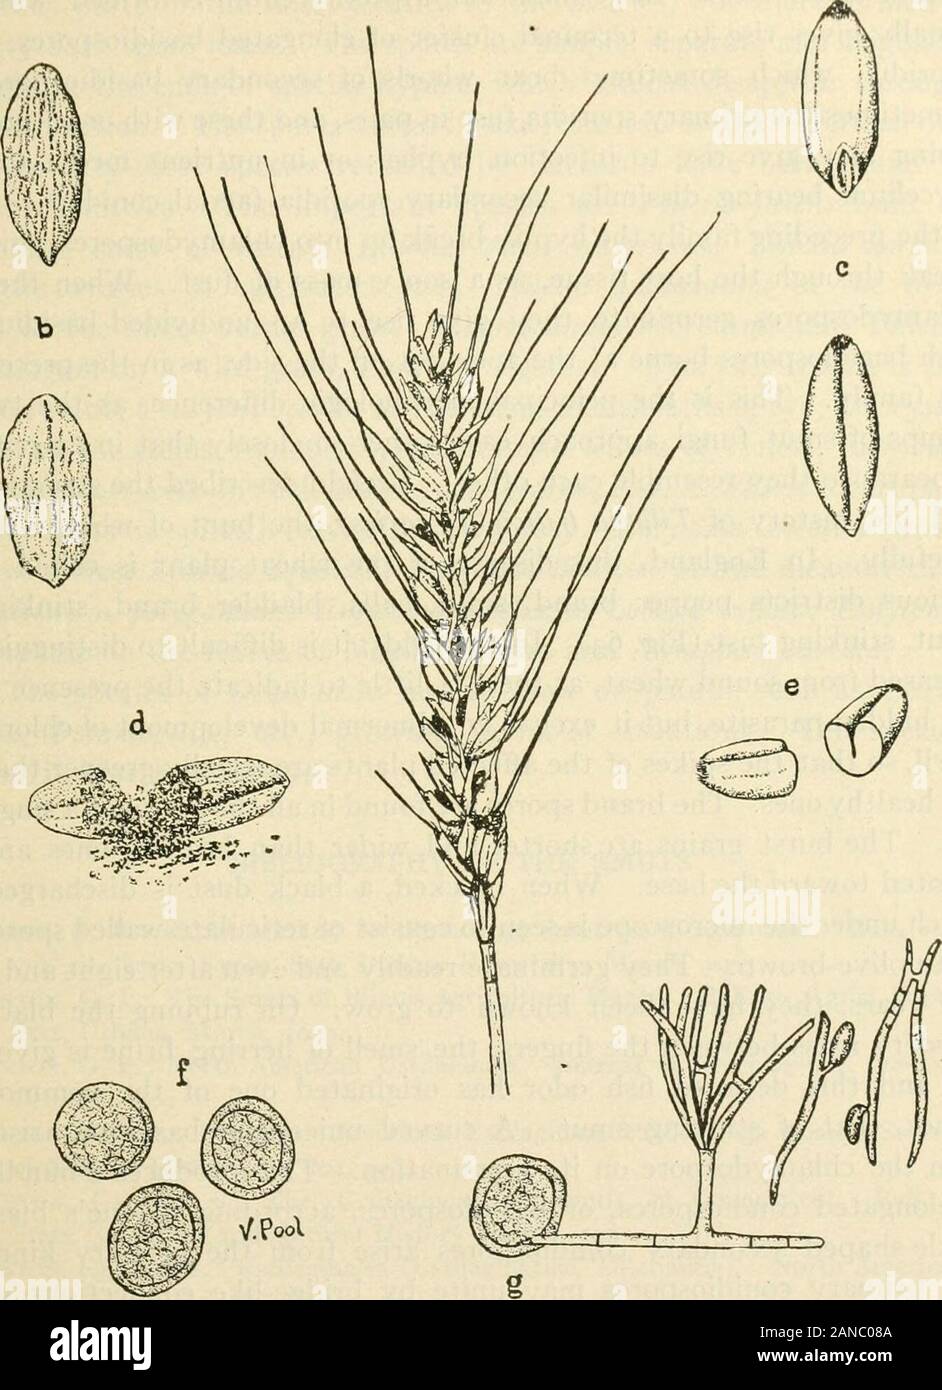 A text-book of mycology and plant pathology . are about seventy-two American species, is distinguishedfrom the other two less important genera by its single spores whichform dusty masses at maturity without any kind of inclosing membrane.Sorosporium has its spores agglutinated into balls which form more orless dusty masses. The spore balls are usually evanescent and thespores are very dark. The spores are agglutinated into balls in Toly-posporium, forming more or less dusty spore masses. The spore ballsare rather permanent, the spores adhering by folds, or thickenings ofthe outer coat. Family Stock Photo